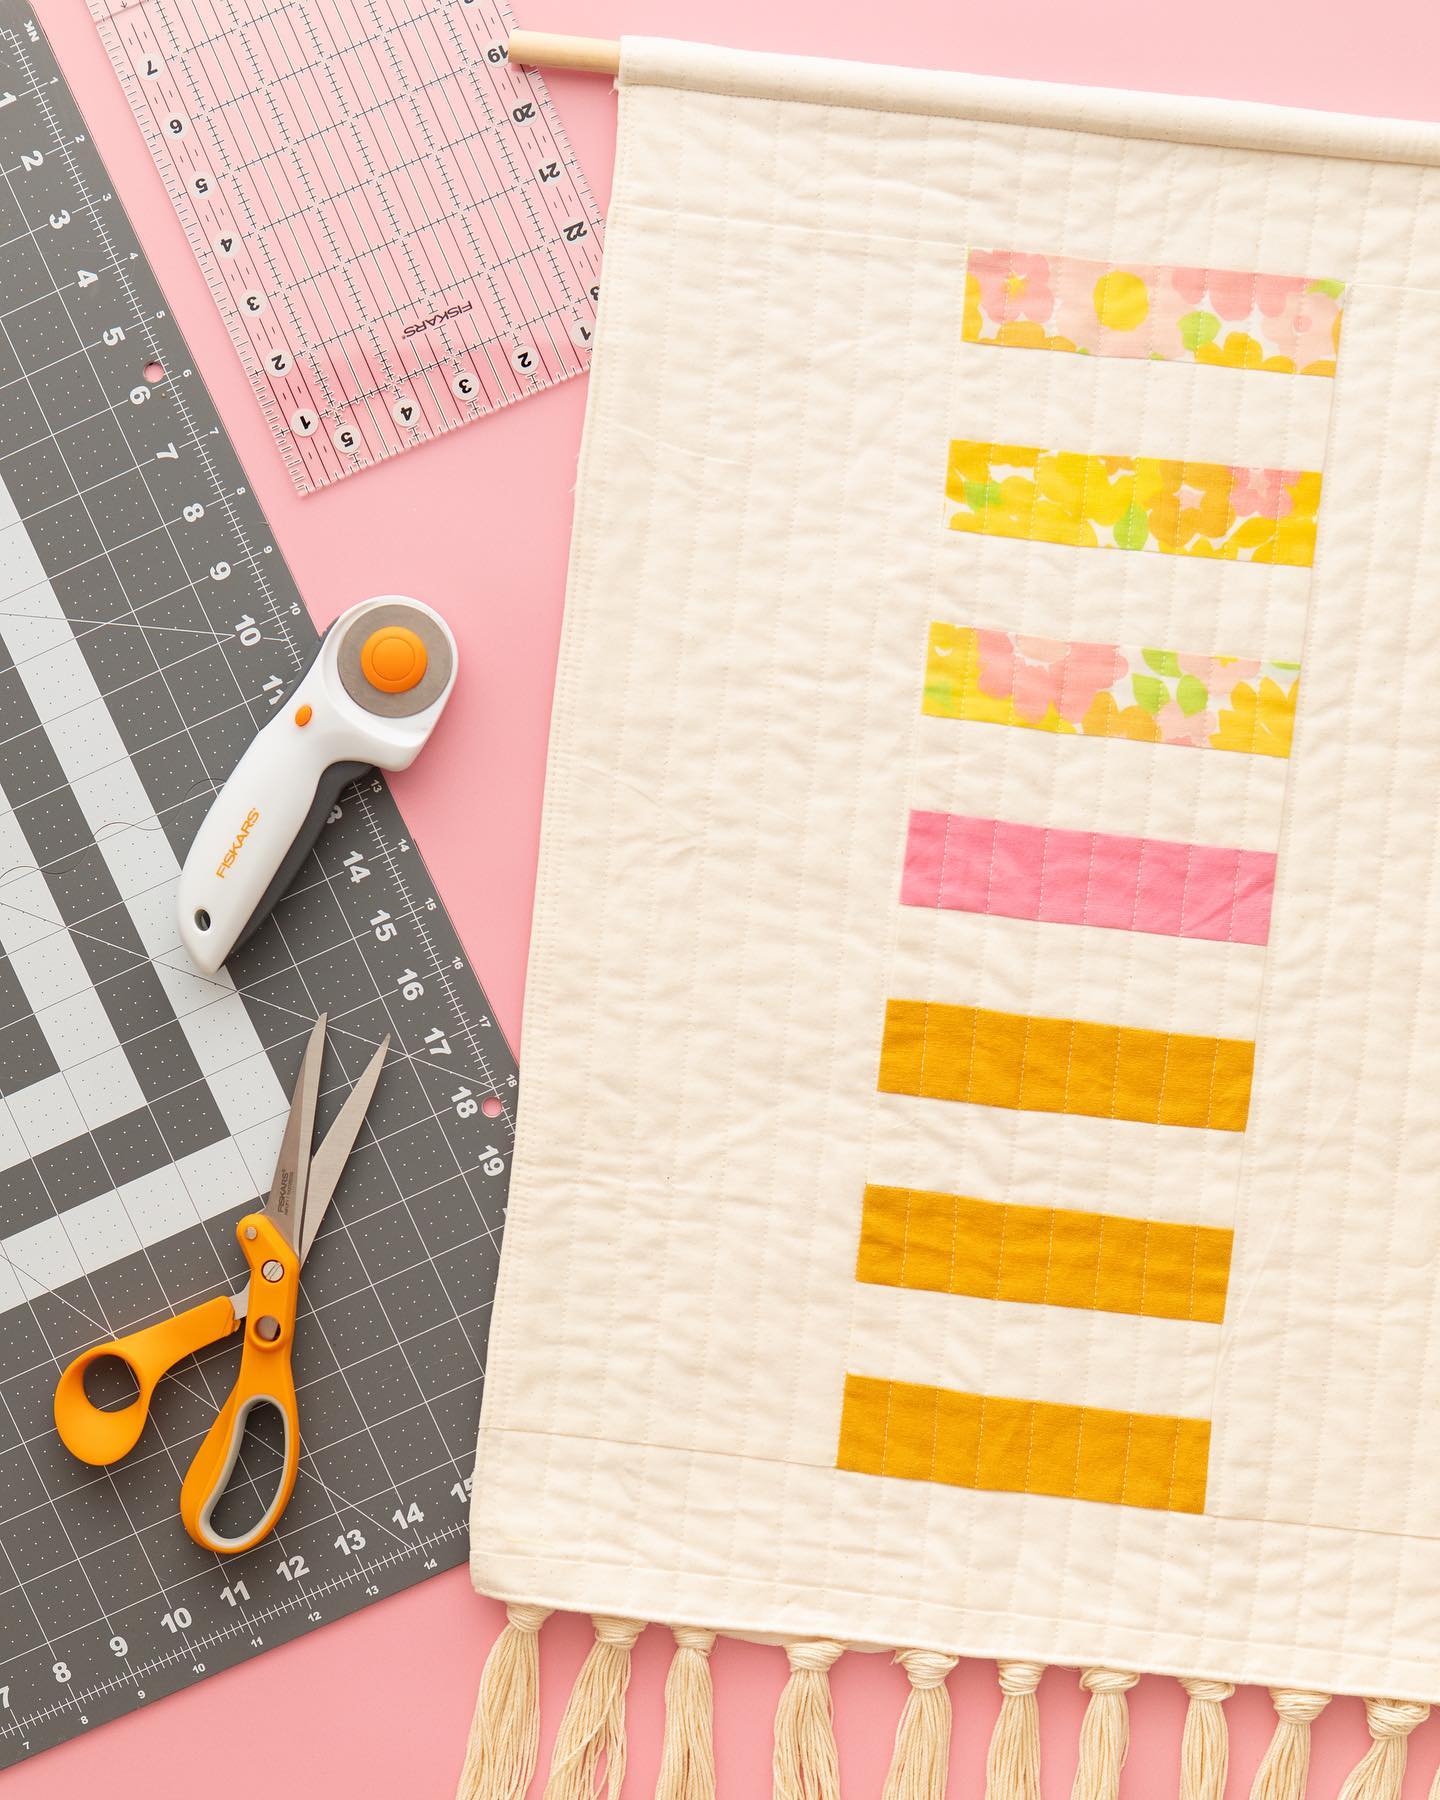 I’m excited to announce my first live workshop of the year!!! 🎉 Who’s going to join me? I’m partnering with @fiskars to teach a @michaelsstores workshop where you will learn how to make a quilted wall hanging like this one—from start to finish! The class on Saturday, March 26 at 1pm EST is $15 and includes access to a recording of the class.  Check the “workshops” highlights on my profile page for the signup link!
.
If you’re new to quilting or have been wanting to dip your toes into quilting this is a great place to start. Please leave a comment below if you have any questions. Cannot wait to create with you!
#makeitwithmichaels #fiskars #sewingworkshop #quiltingclass #sarahhearts